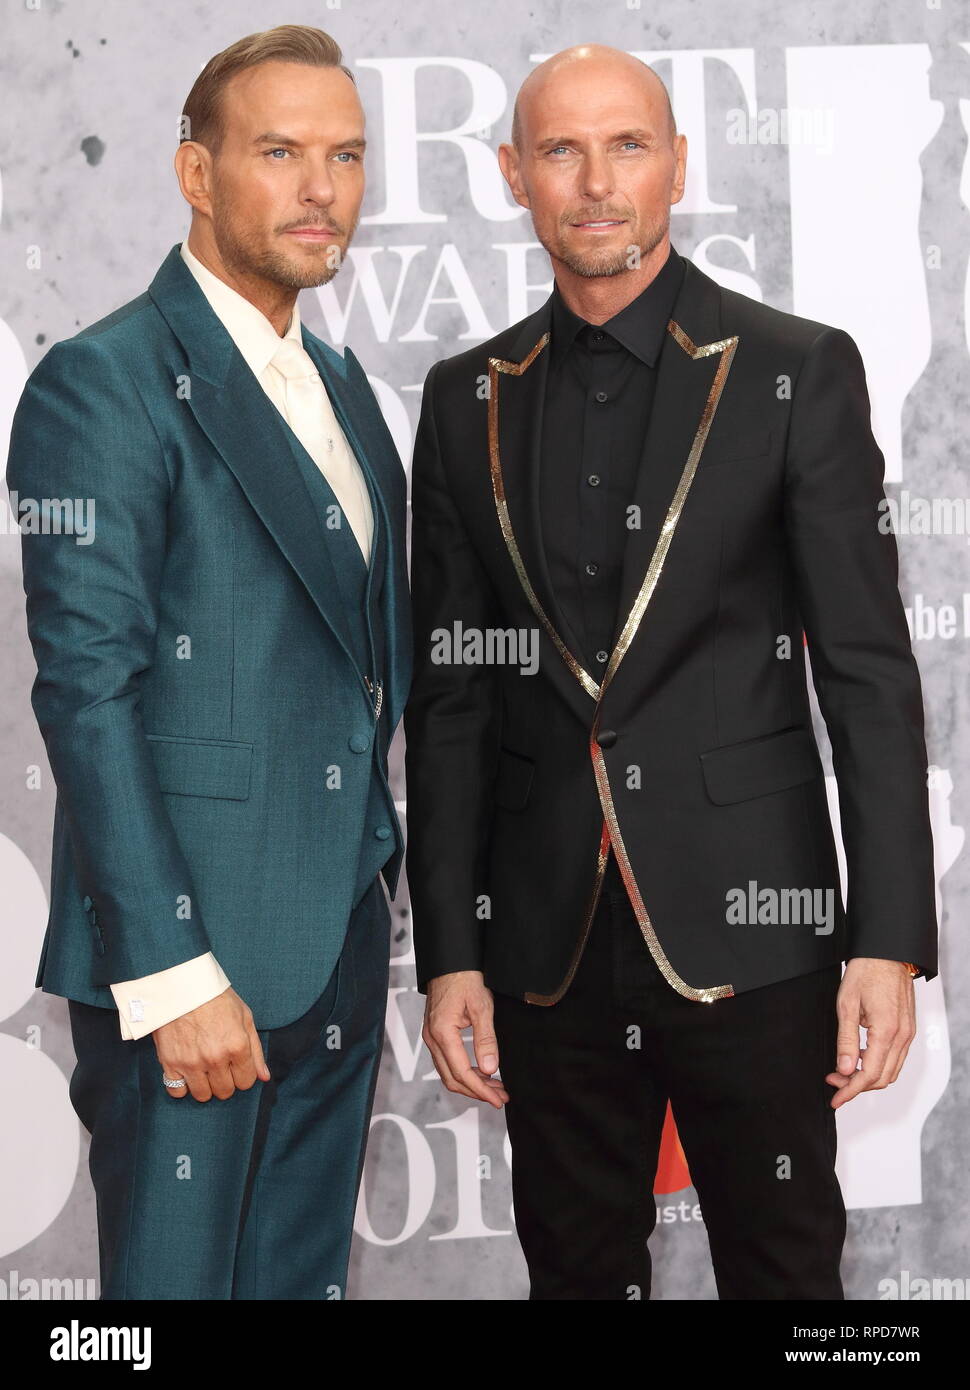 Matt and Luke Goss - Bros are seen on the red carpet during The BRIT Awards 2019 at The O2, Peninsula Square in London. Stock Photo